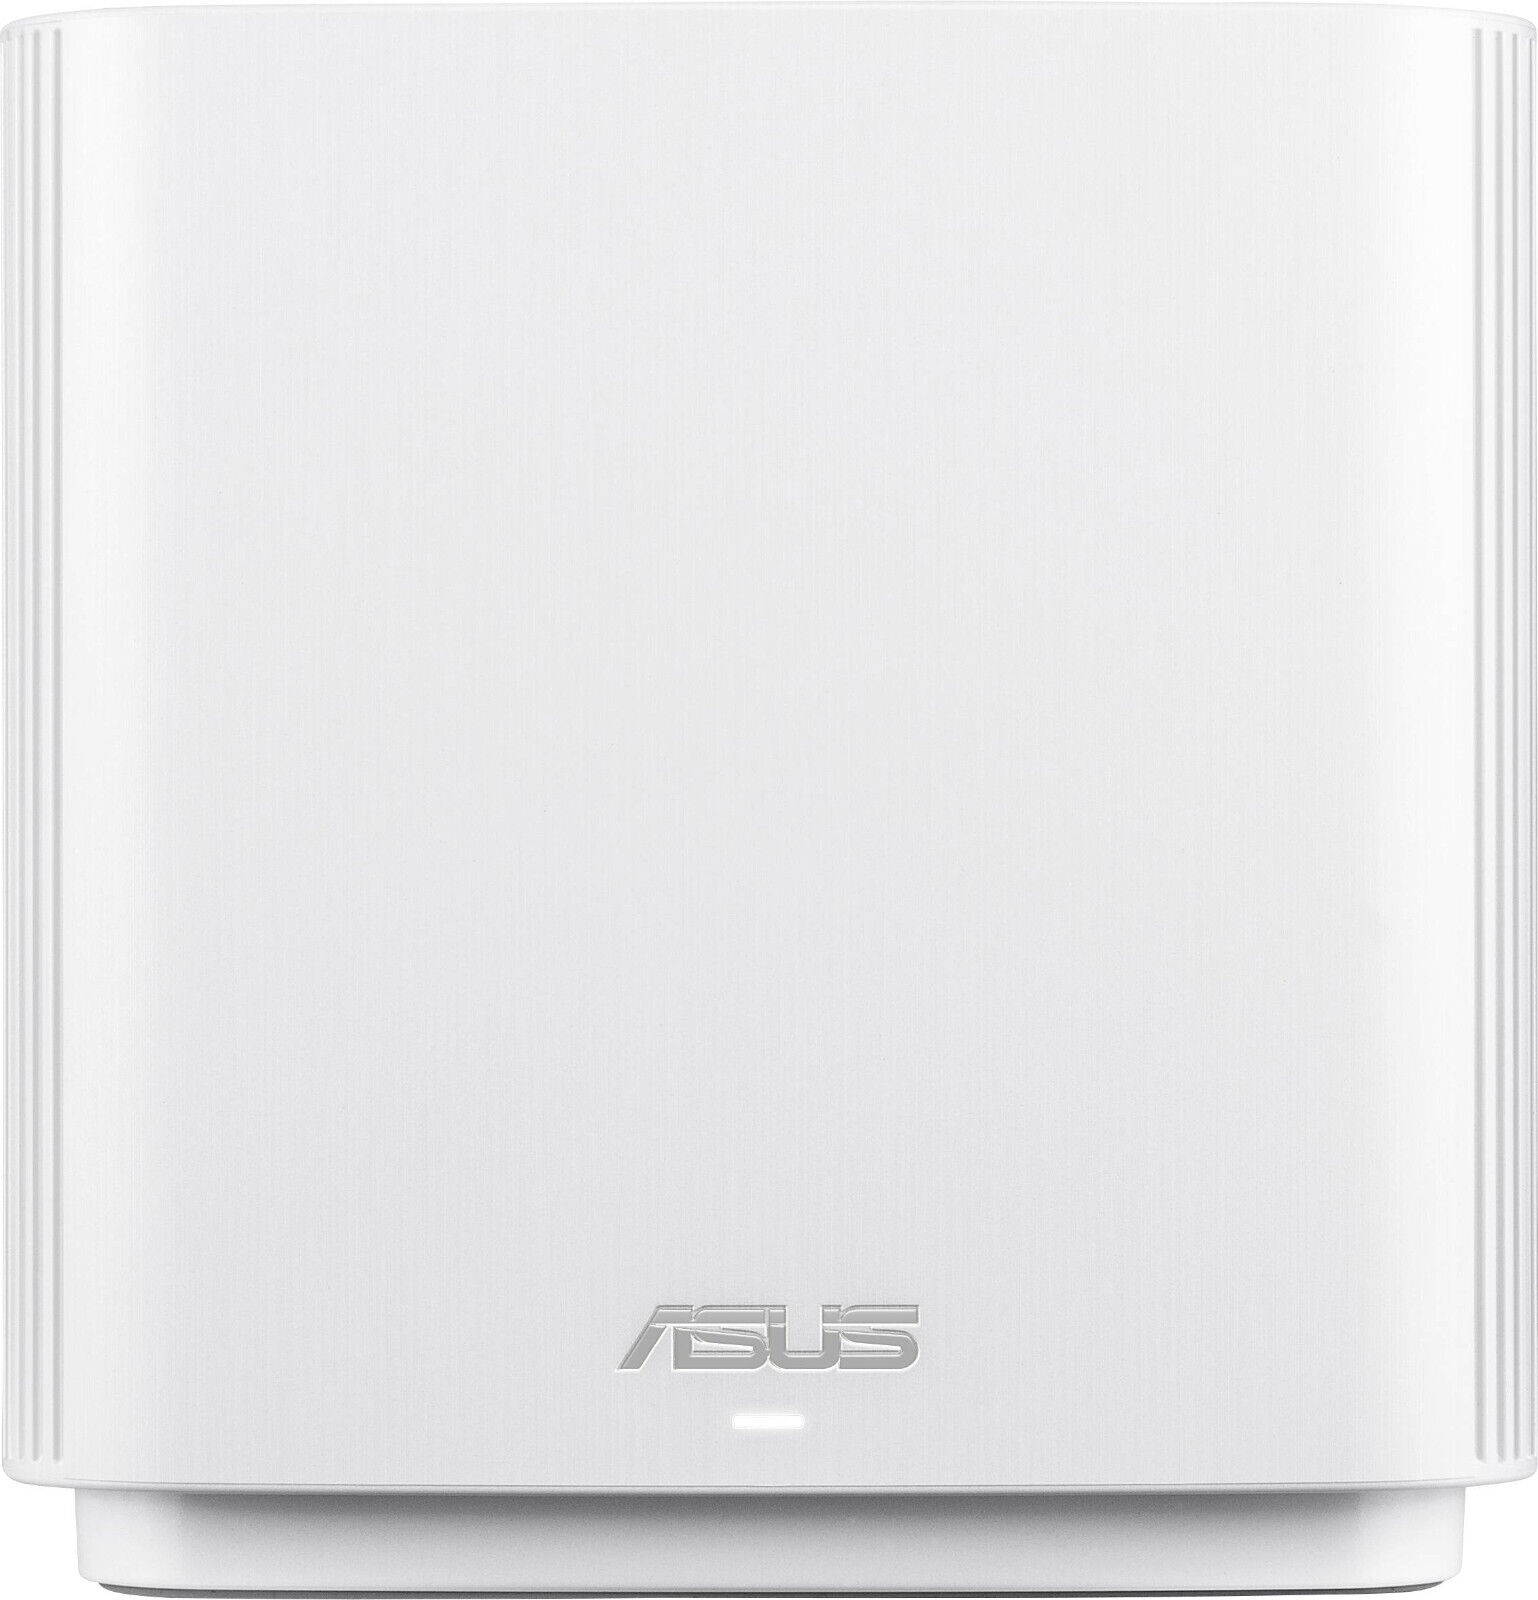 Asus ZenWiFi AC (CT8) AC3000 Wi-Fi router 5 GHz, 2.4 GHz 3000 MBit/s